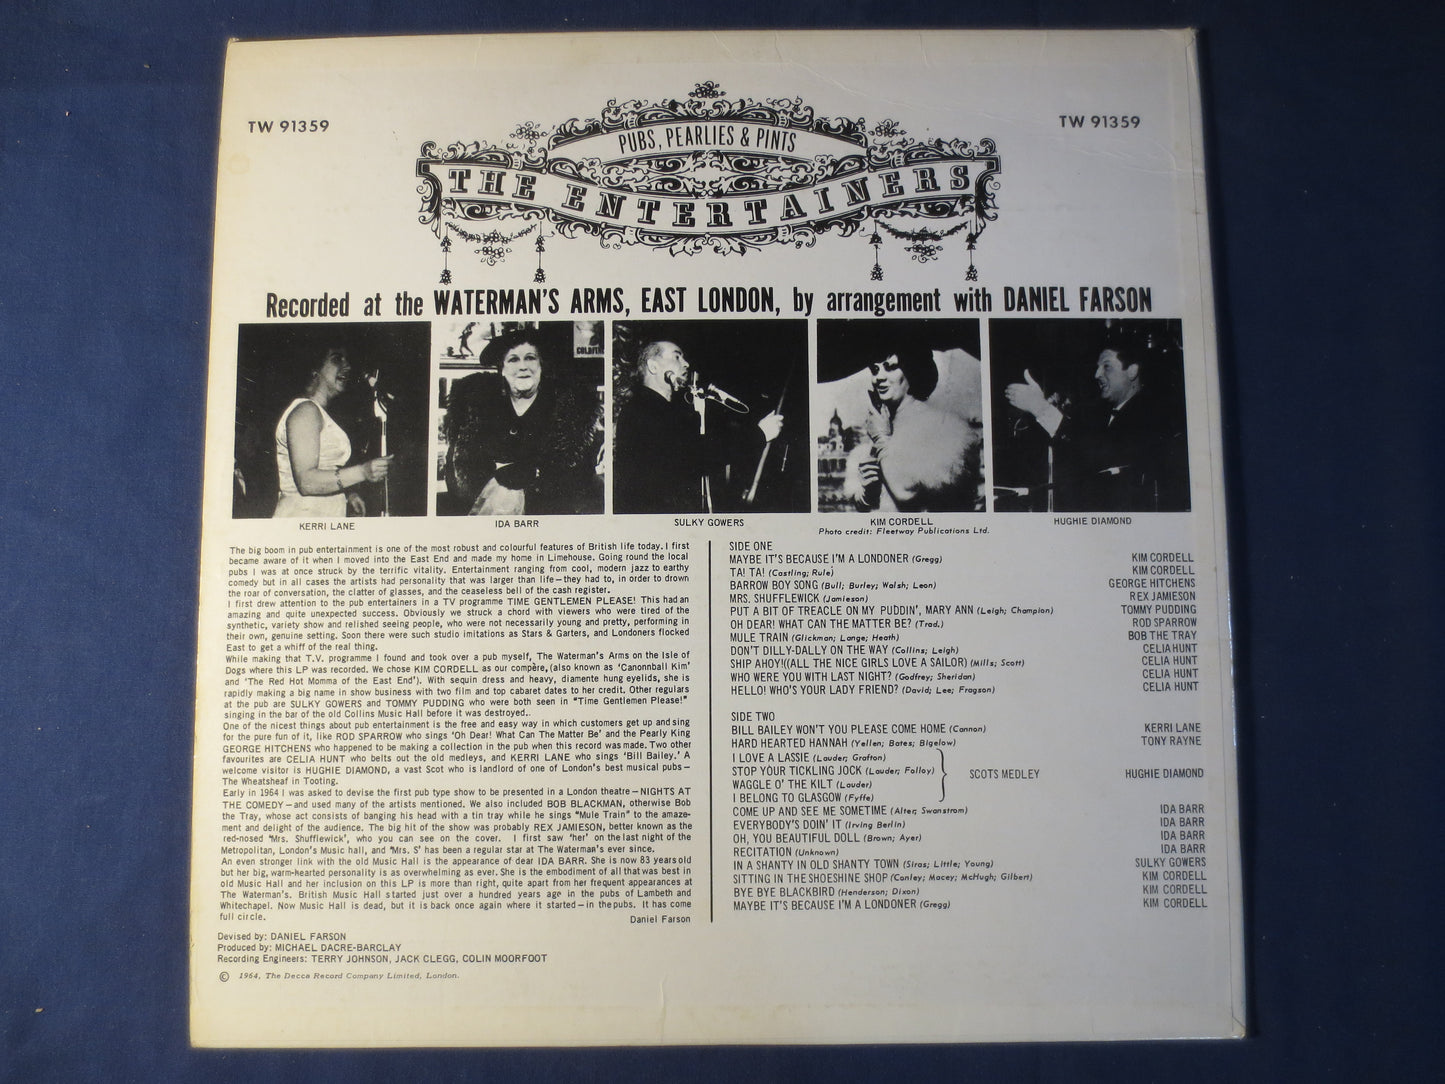 The ENTERTAINERS, PUBS PEARLIES & Pints, Lp, Ragtime Records, Honky Tonk Records, Vintage Vinyl, Vinyl Record, 1964 Records